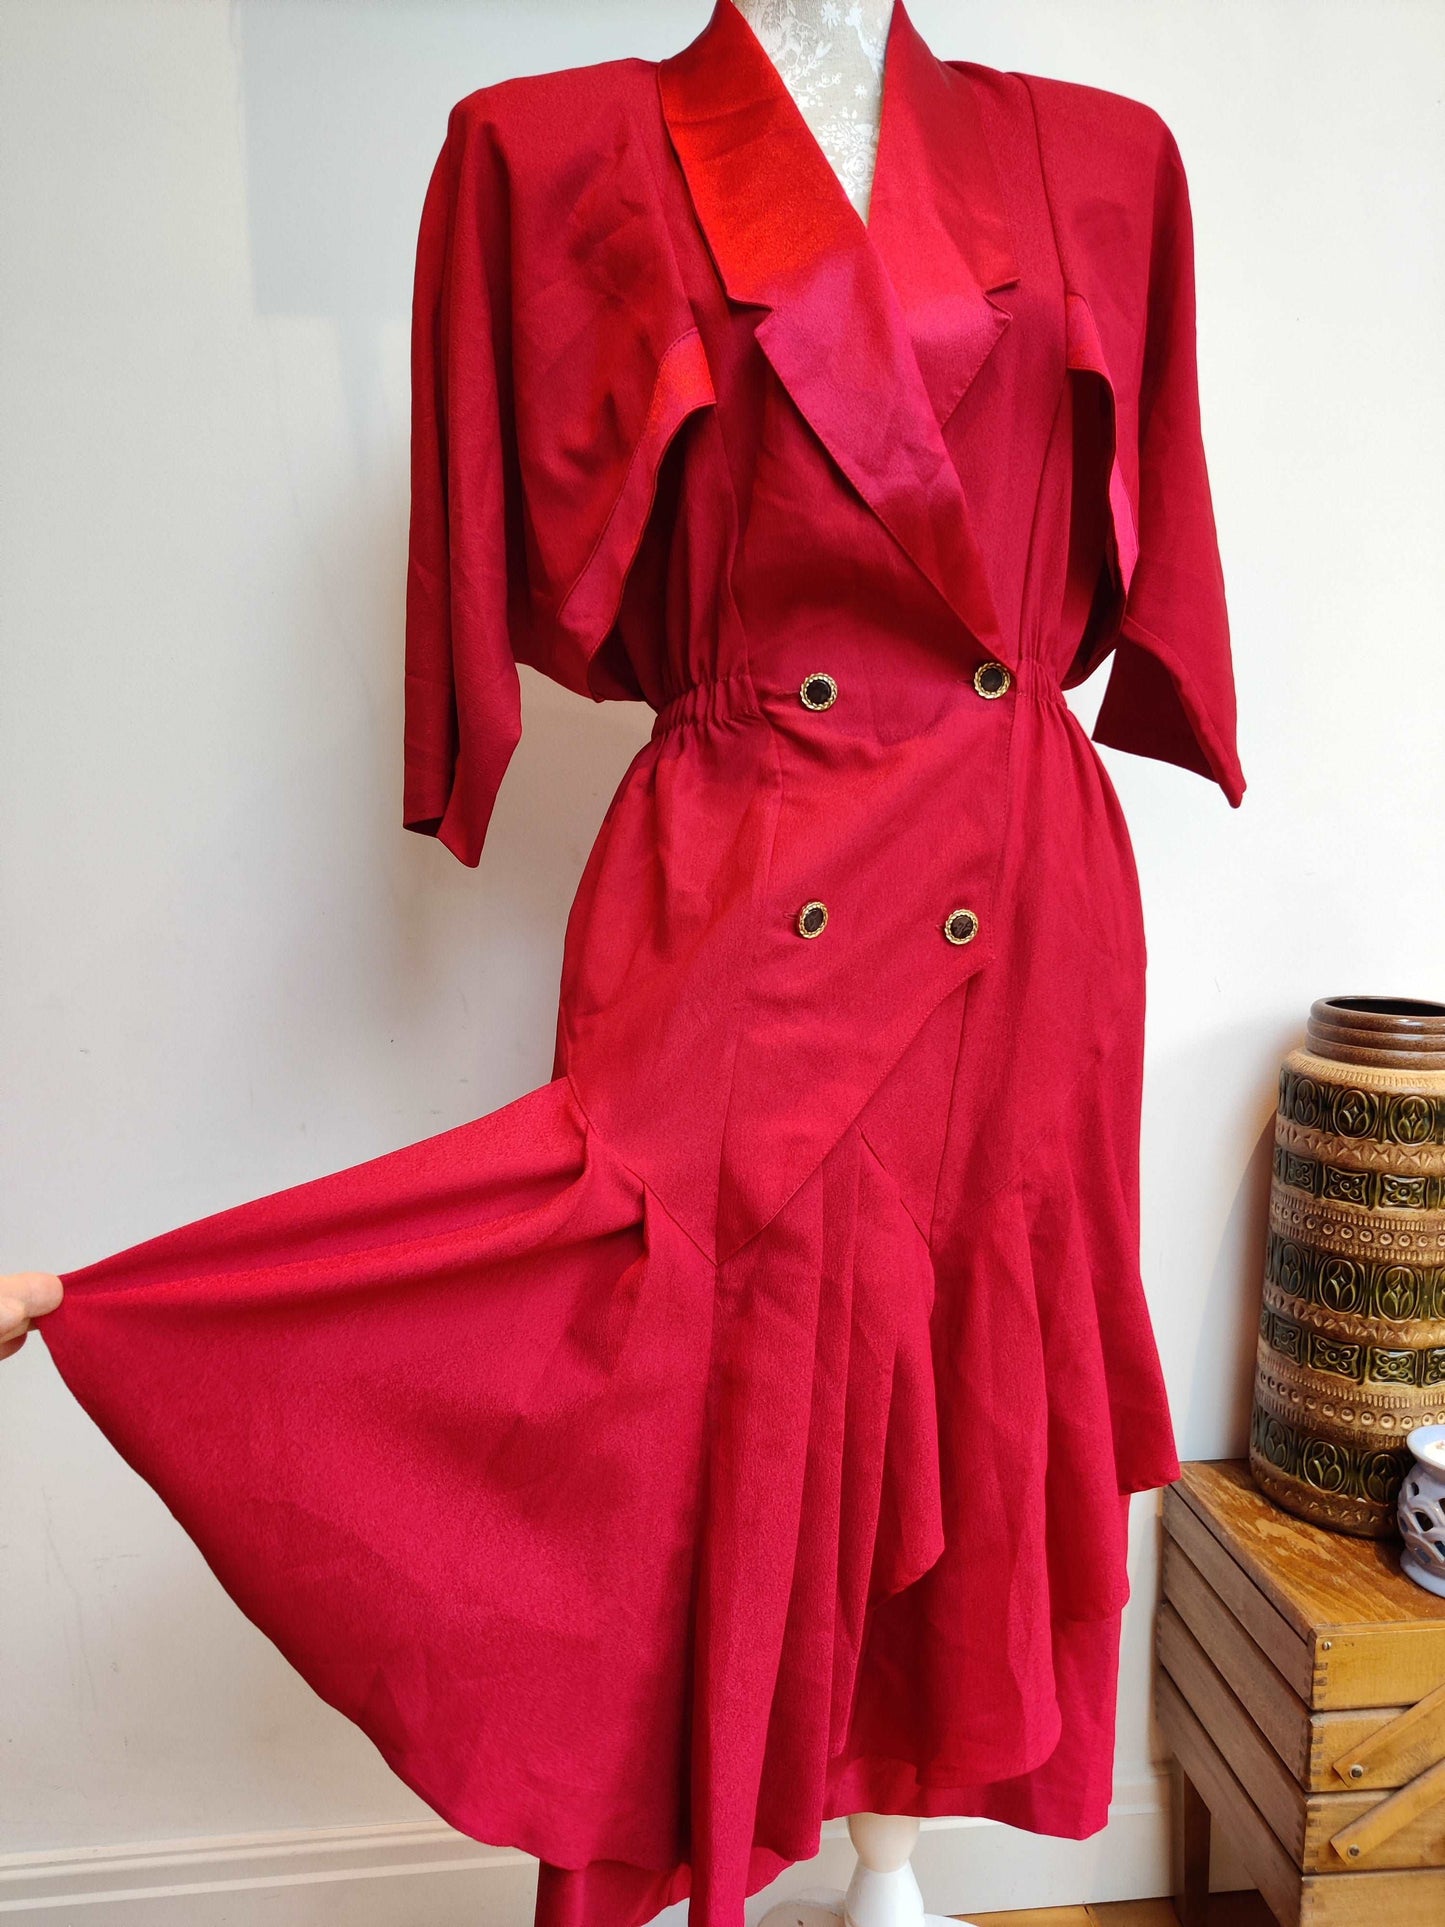 Lovely vintage dress in red with black and gold buttons.